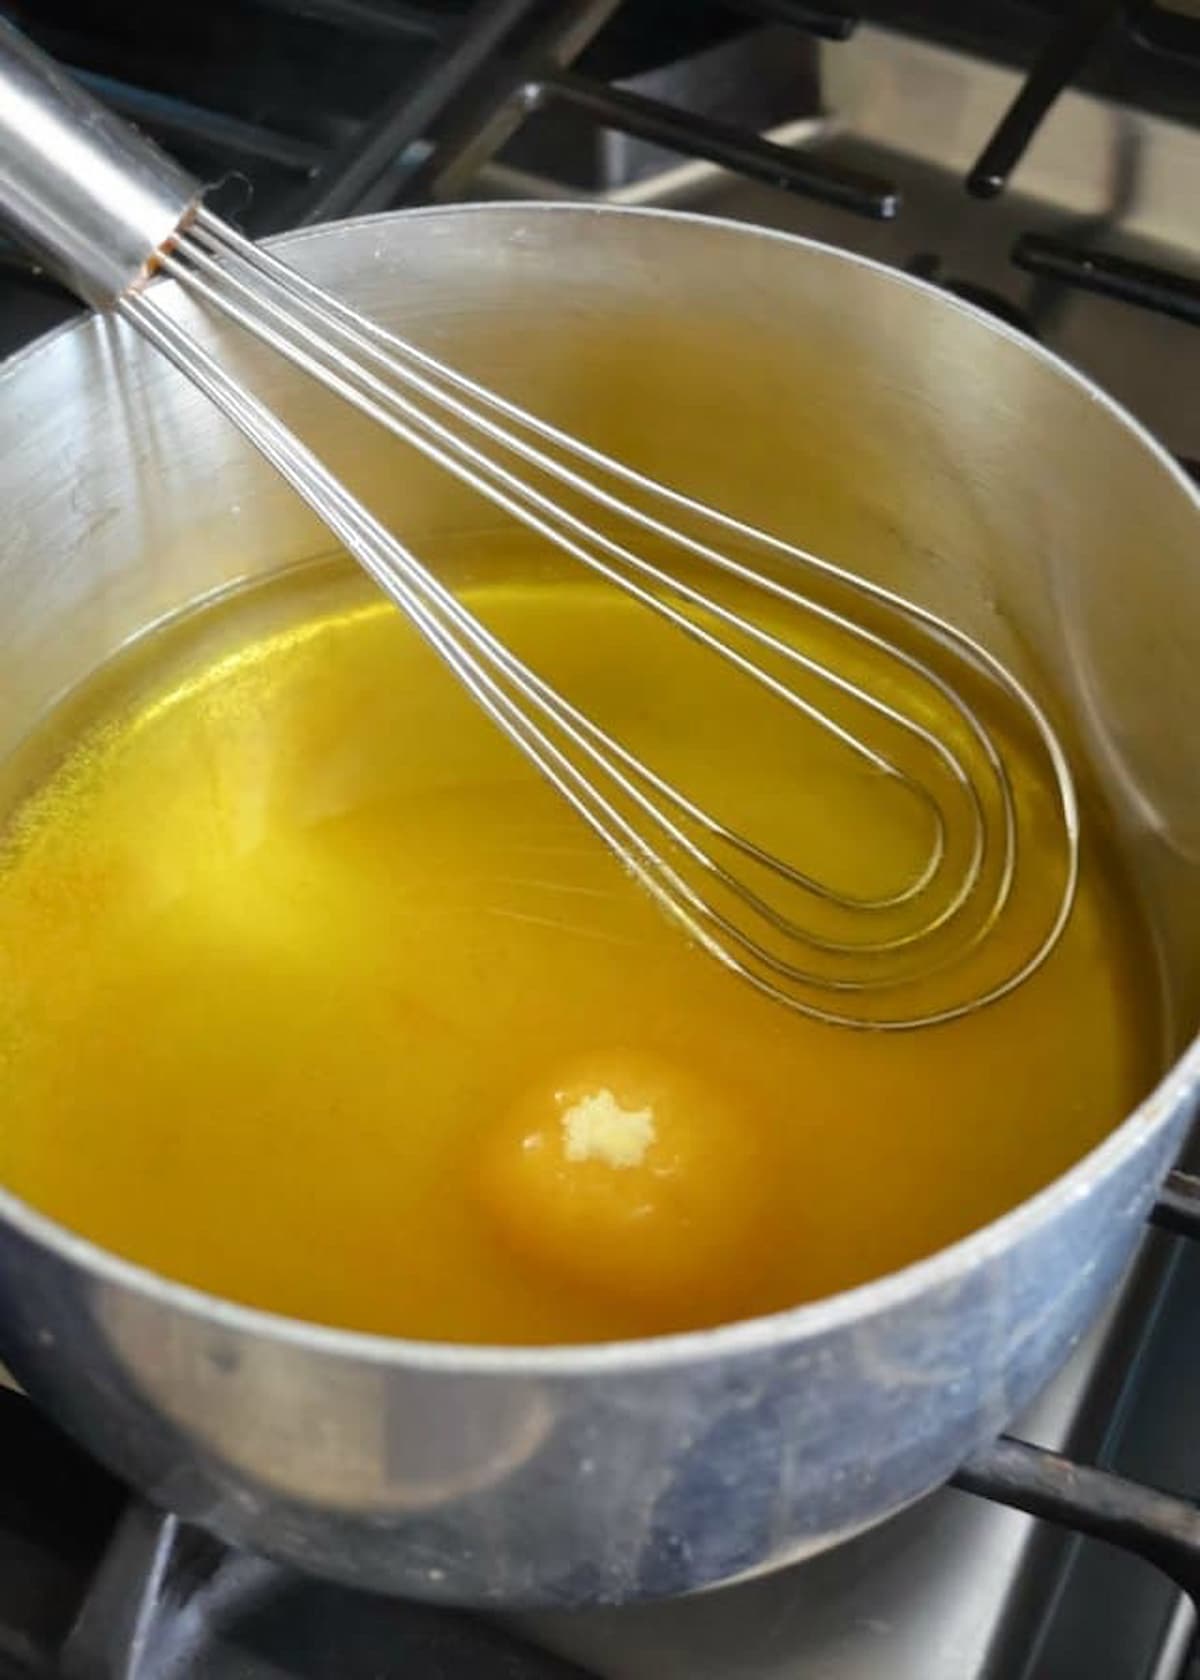 Lemon Jello being whisked into boiling water in a large saucepan.